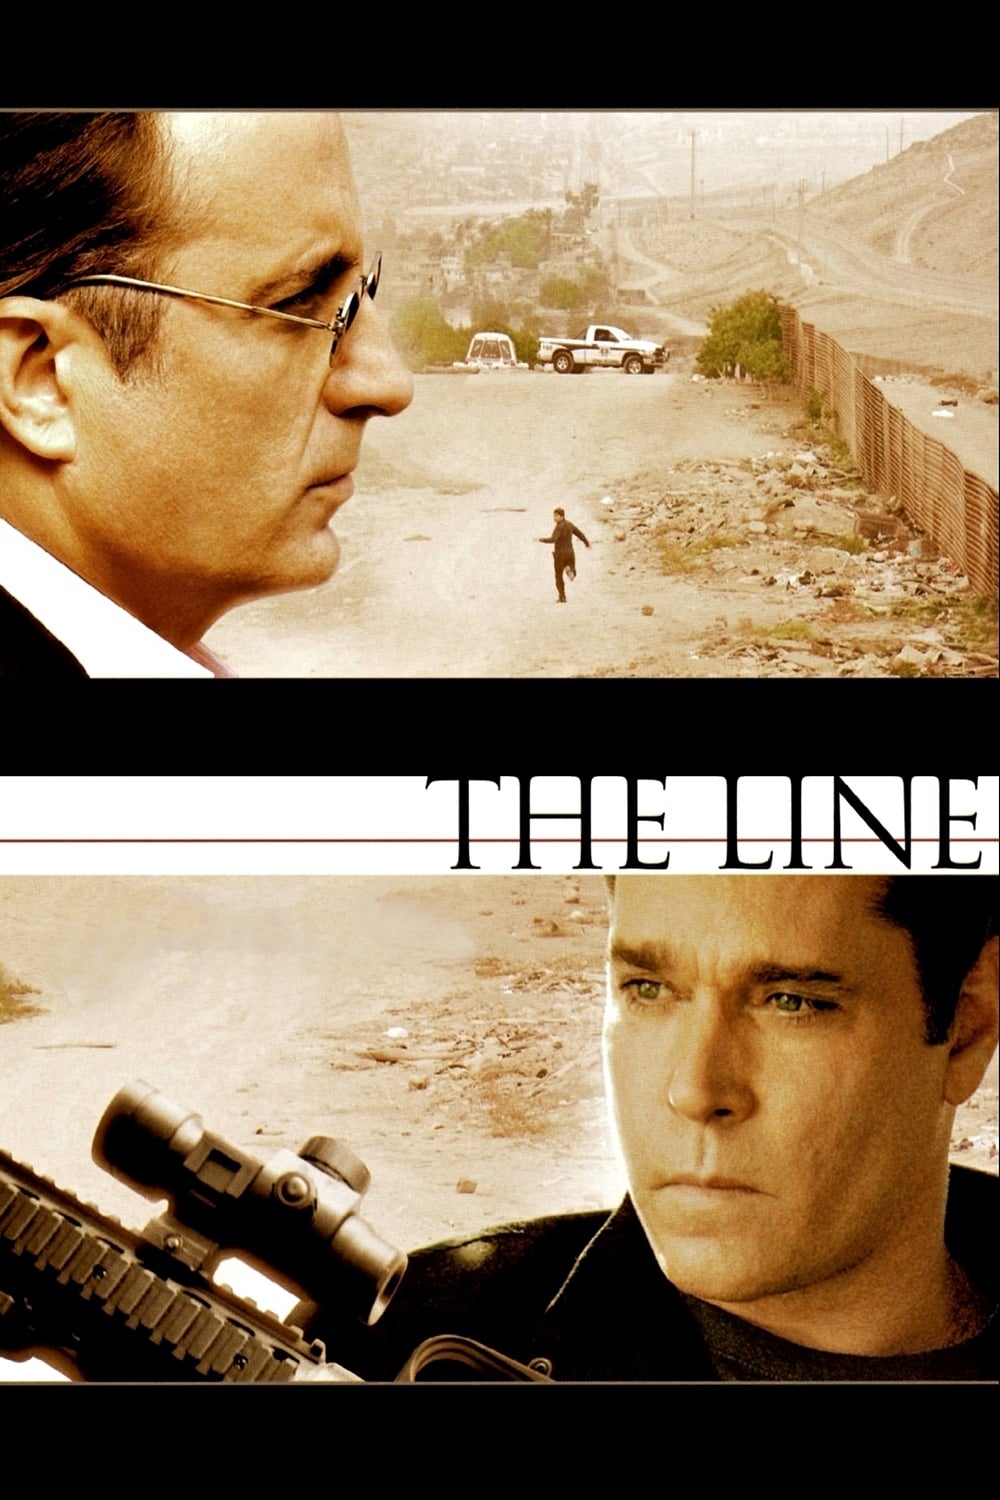 The Line streaming